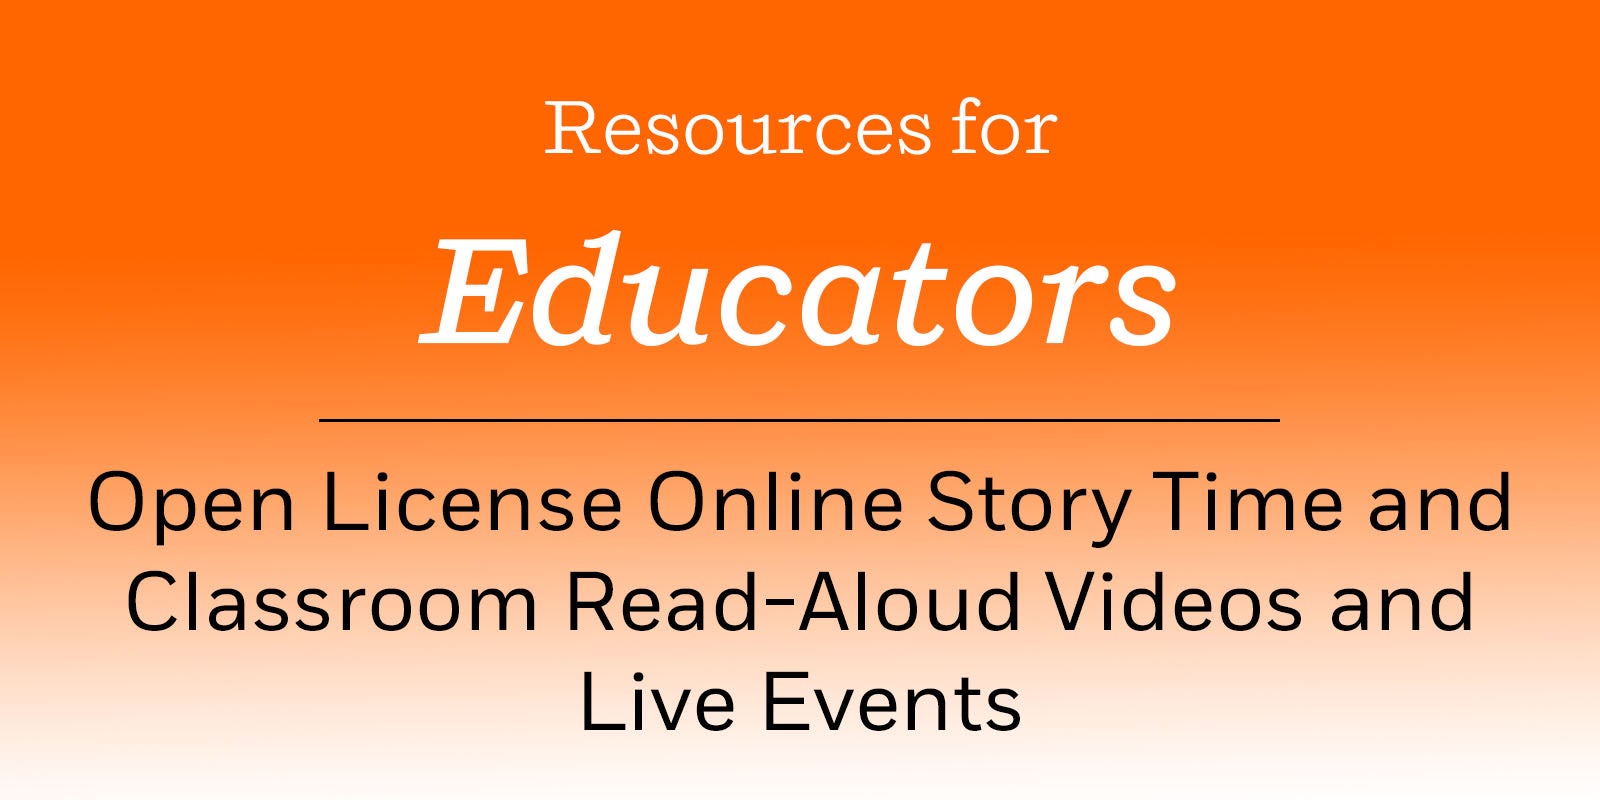 Penguin Random House Open License Online Story Time and Classroom Read-Aloud Videos and Live Events